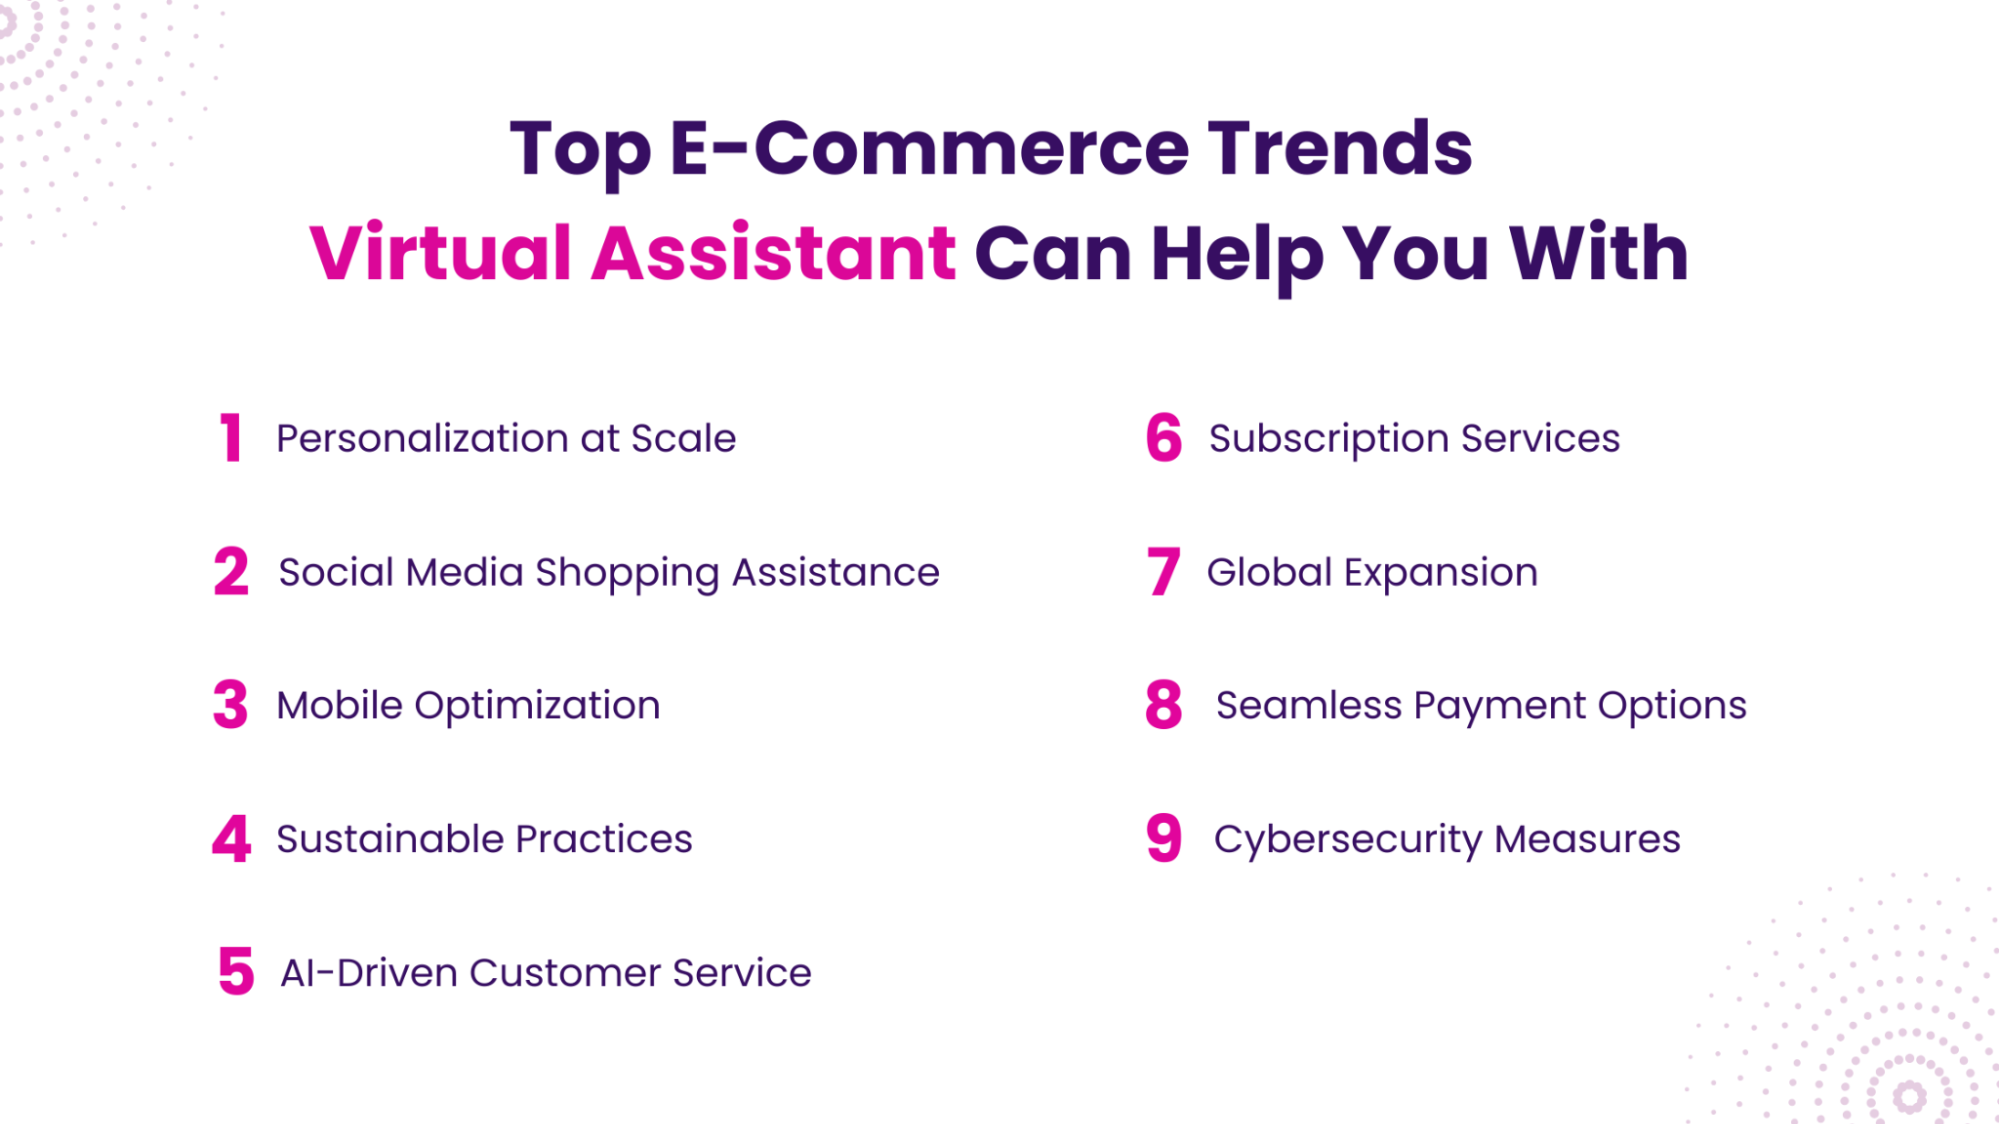 Top E-Commerce Trends Virtual Assistant Can Help You With